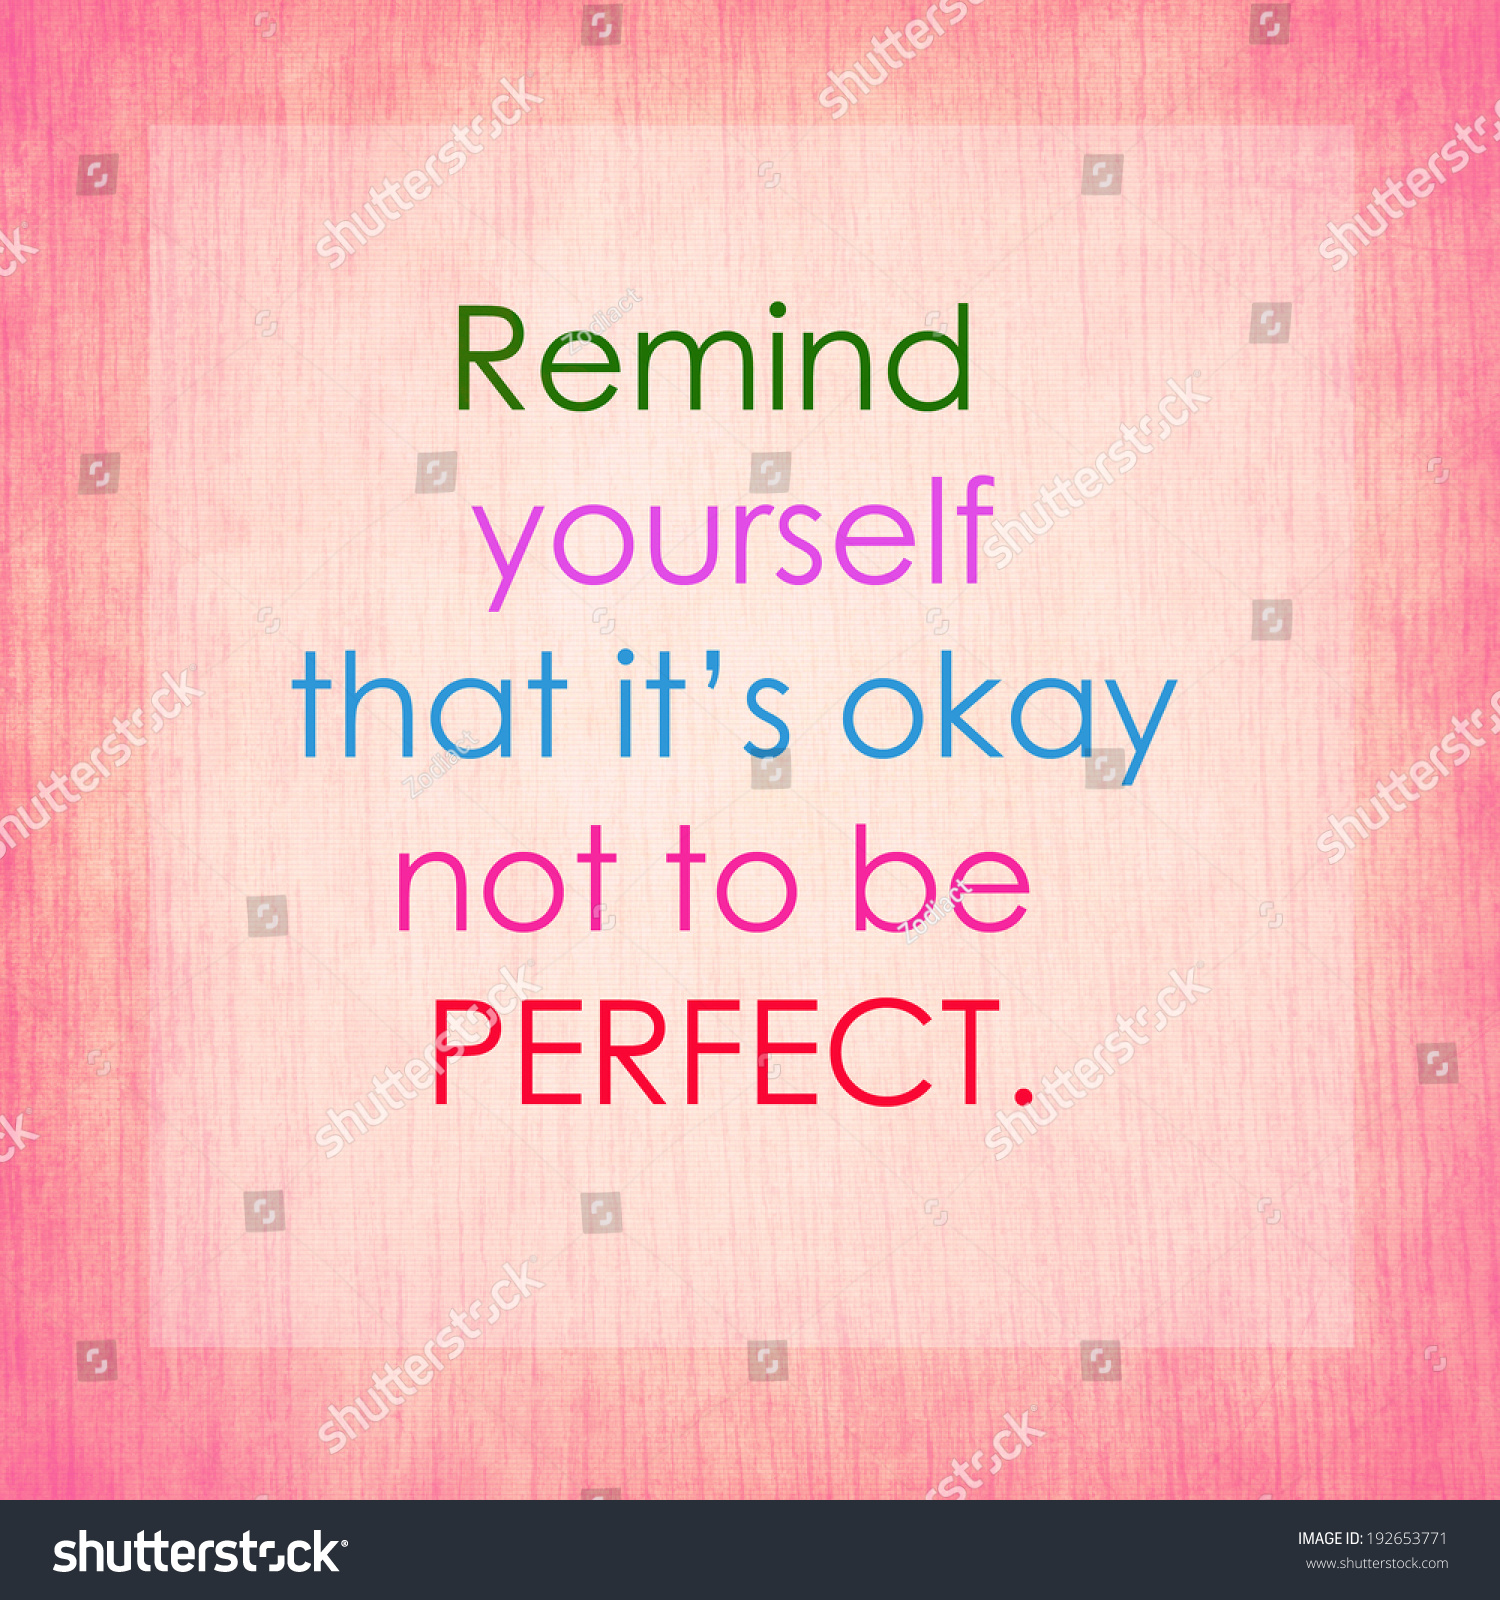 Life Quote Inspirational Quote On Pink Stock Illustration 192653771  Shutterstock